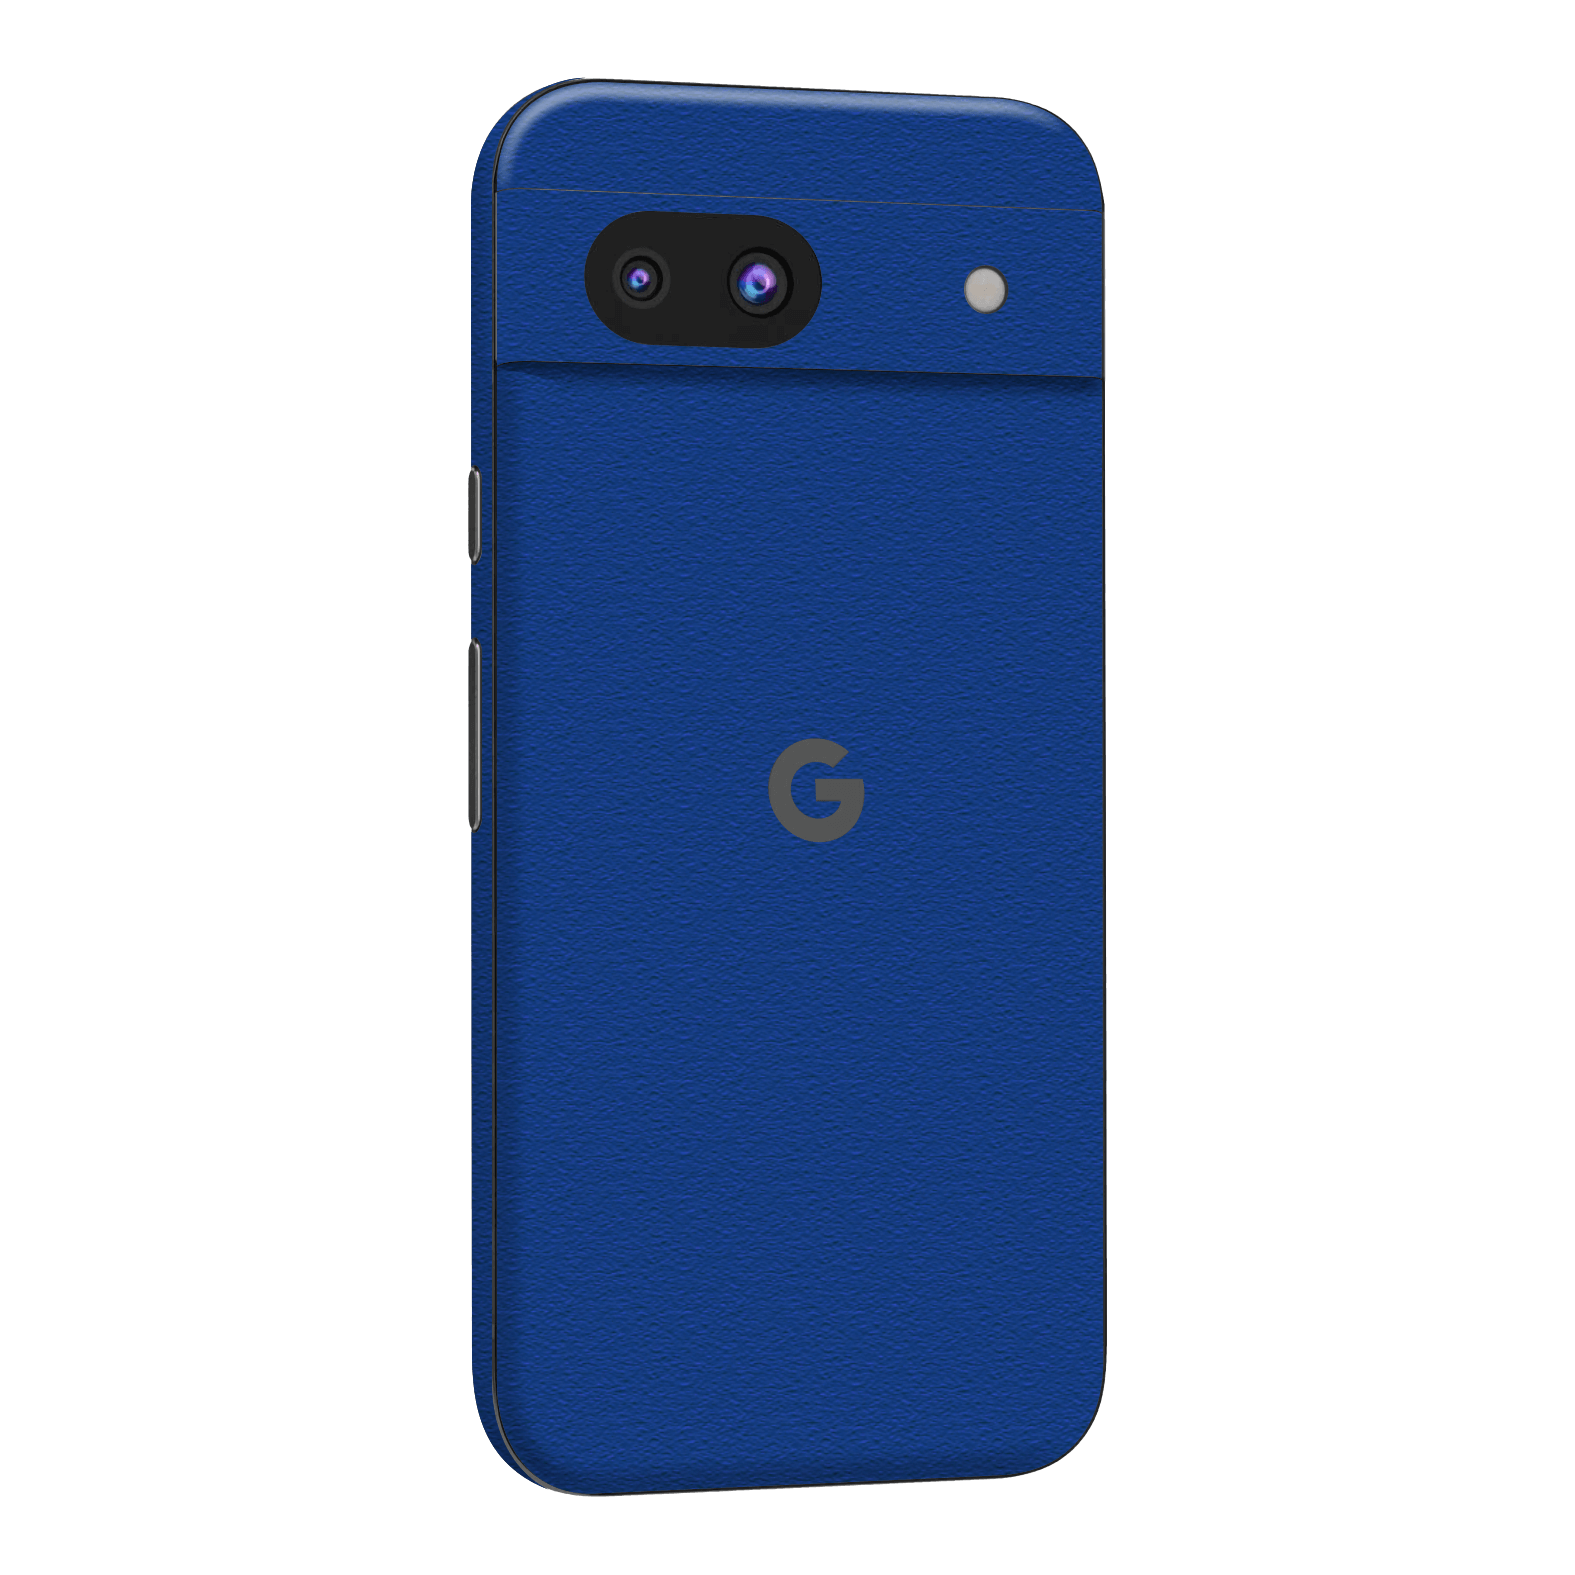 Google Pixel 8a Luxuria Admiral Blue 3D Textured Skin Wrap Sticker Decal Cover Protector by QSKINZ | qskinz.com